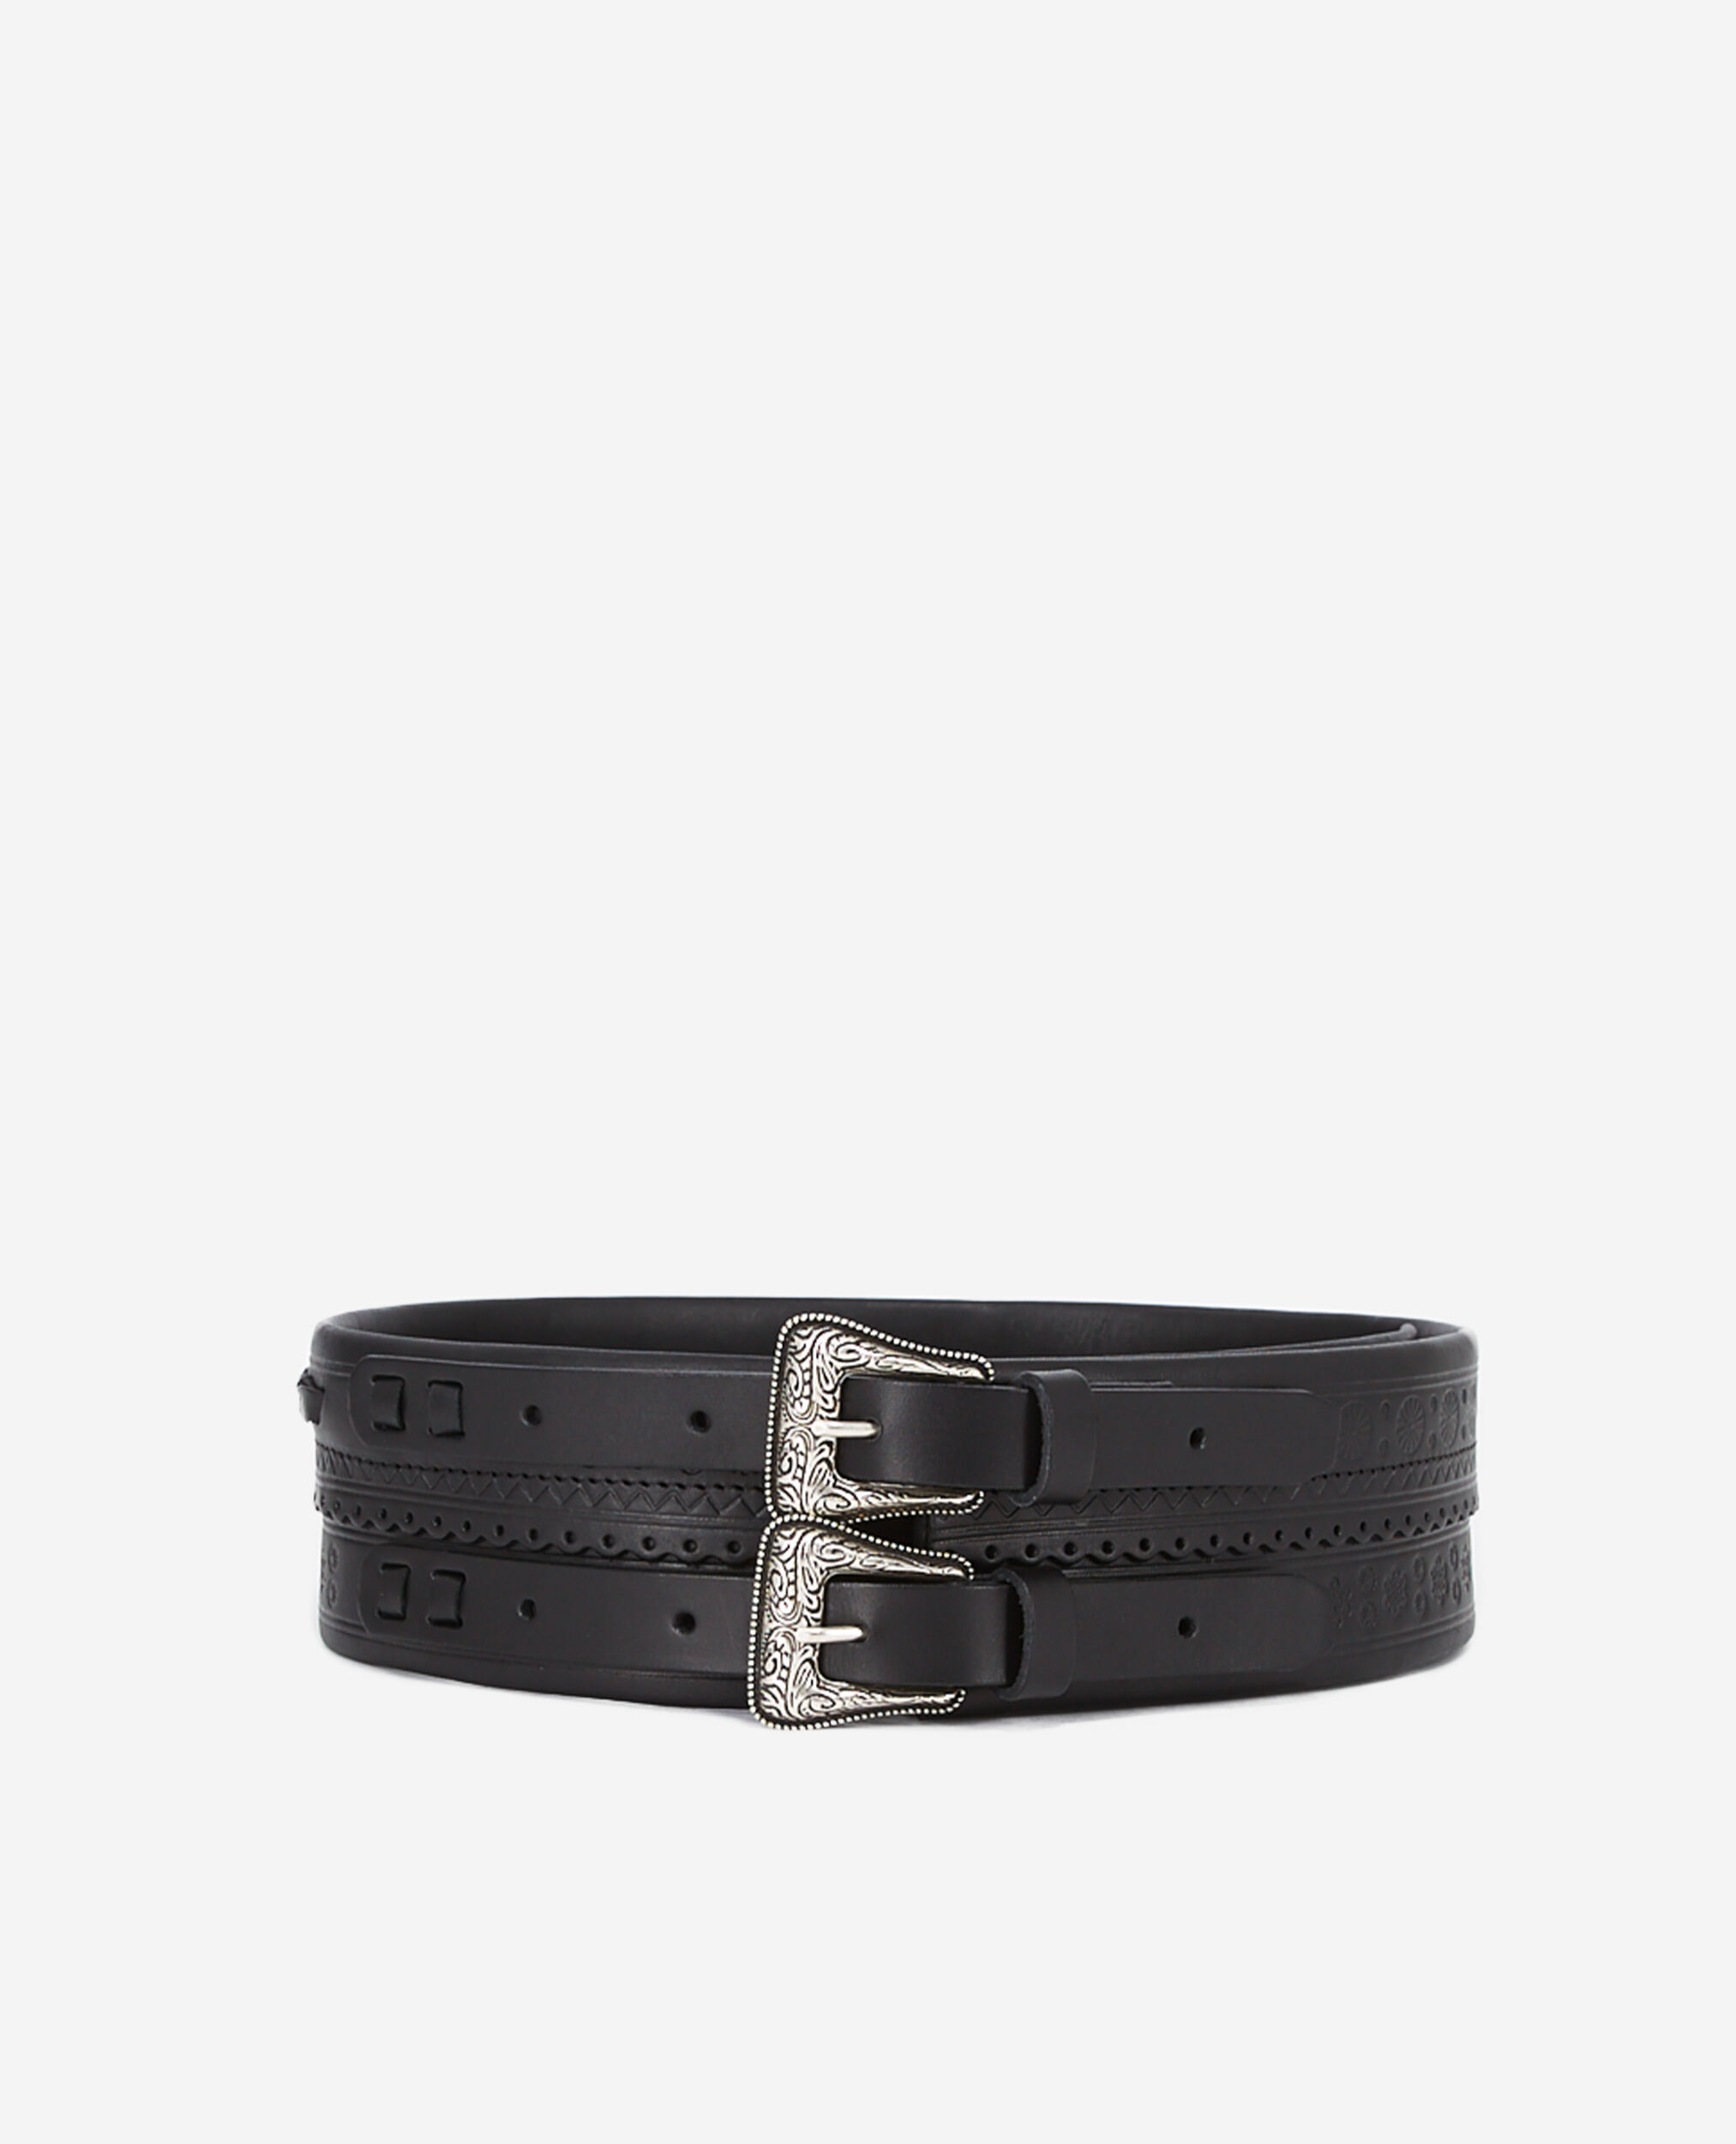 Wide black leather belt with double buckle, BLACK, hi-res image number null